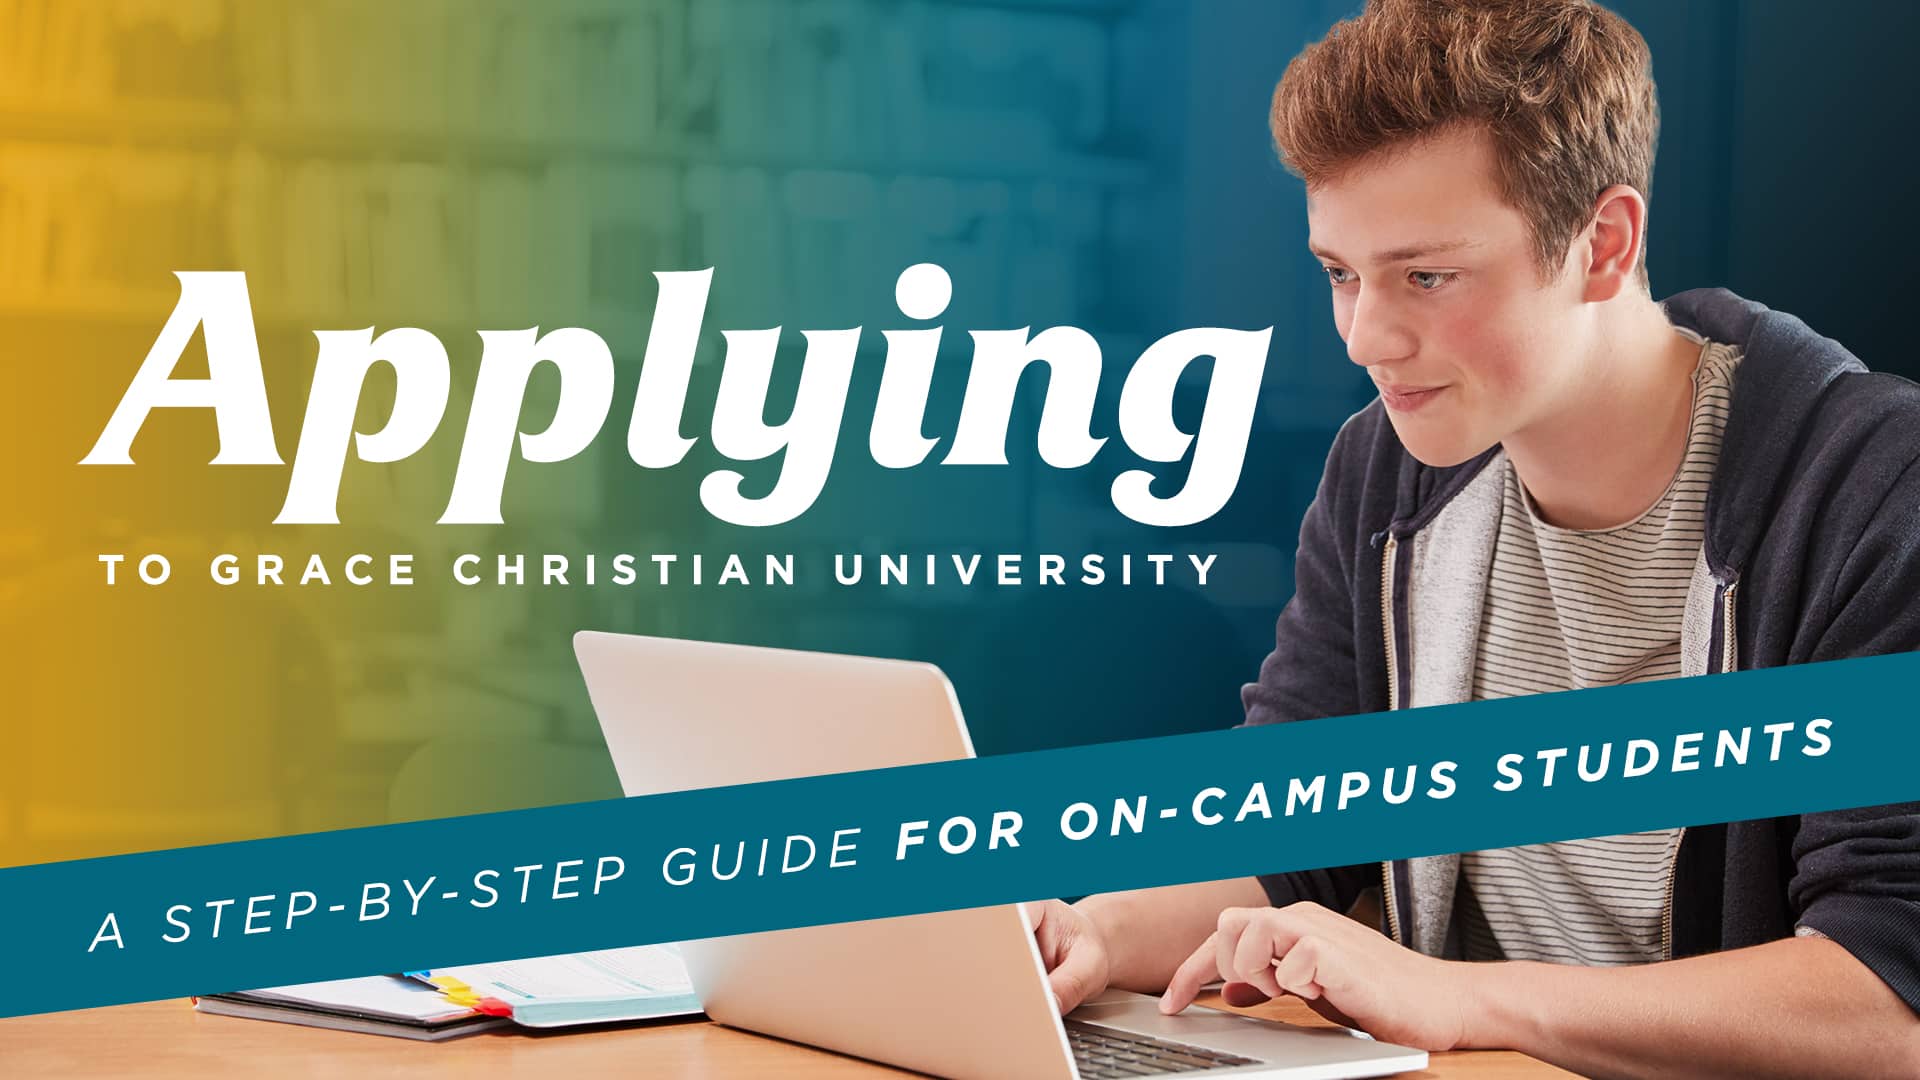 Applying-to-Grace-Christian-University-A-Step-by-Step-Guide-for-On-Campus-Students